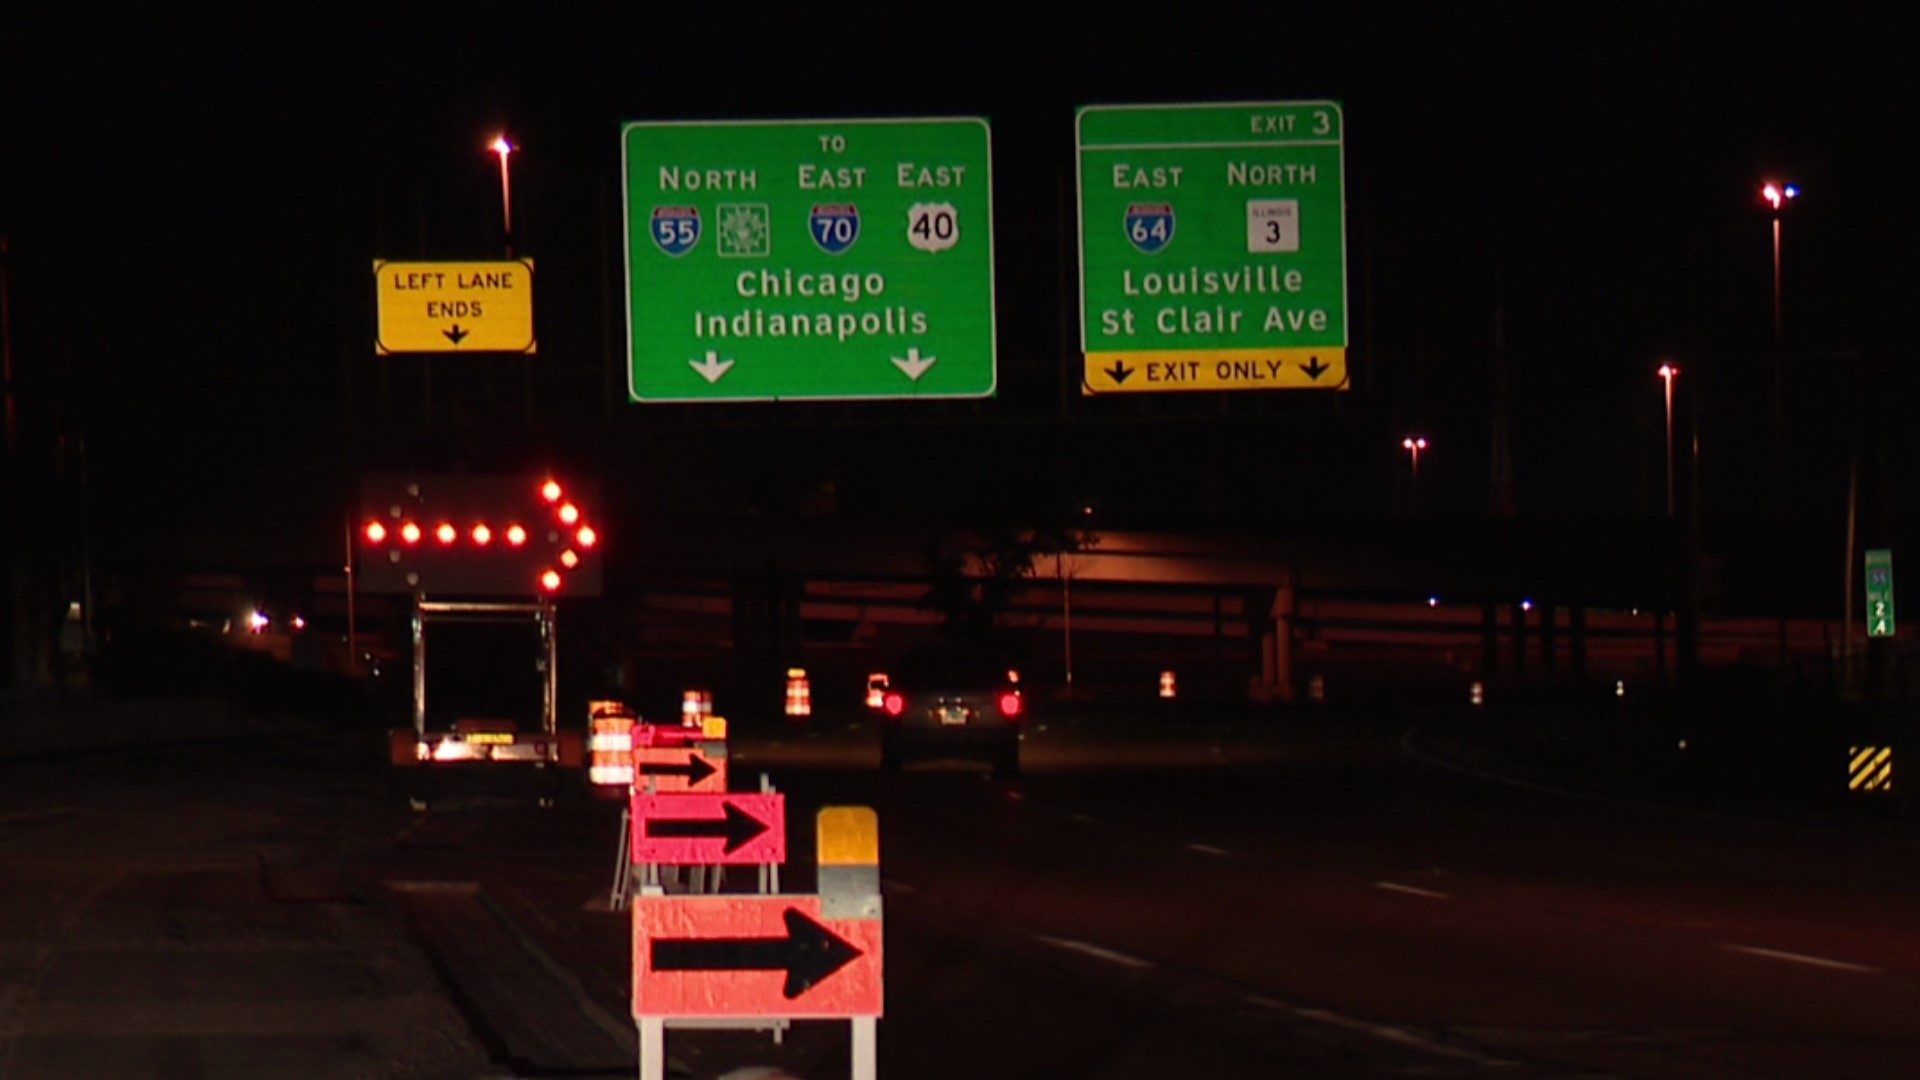 Starting Friday night, the Illinois Department of Transportation will close down I-55/70 to make repairs. It will impact traffic between I-64 and I-255 interchanges.